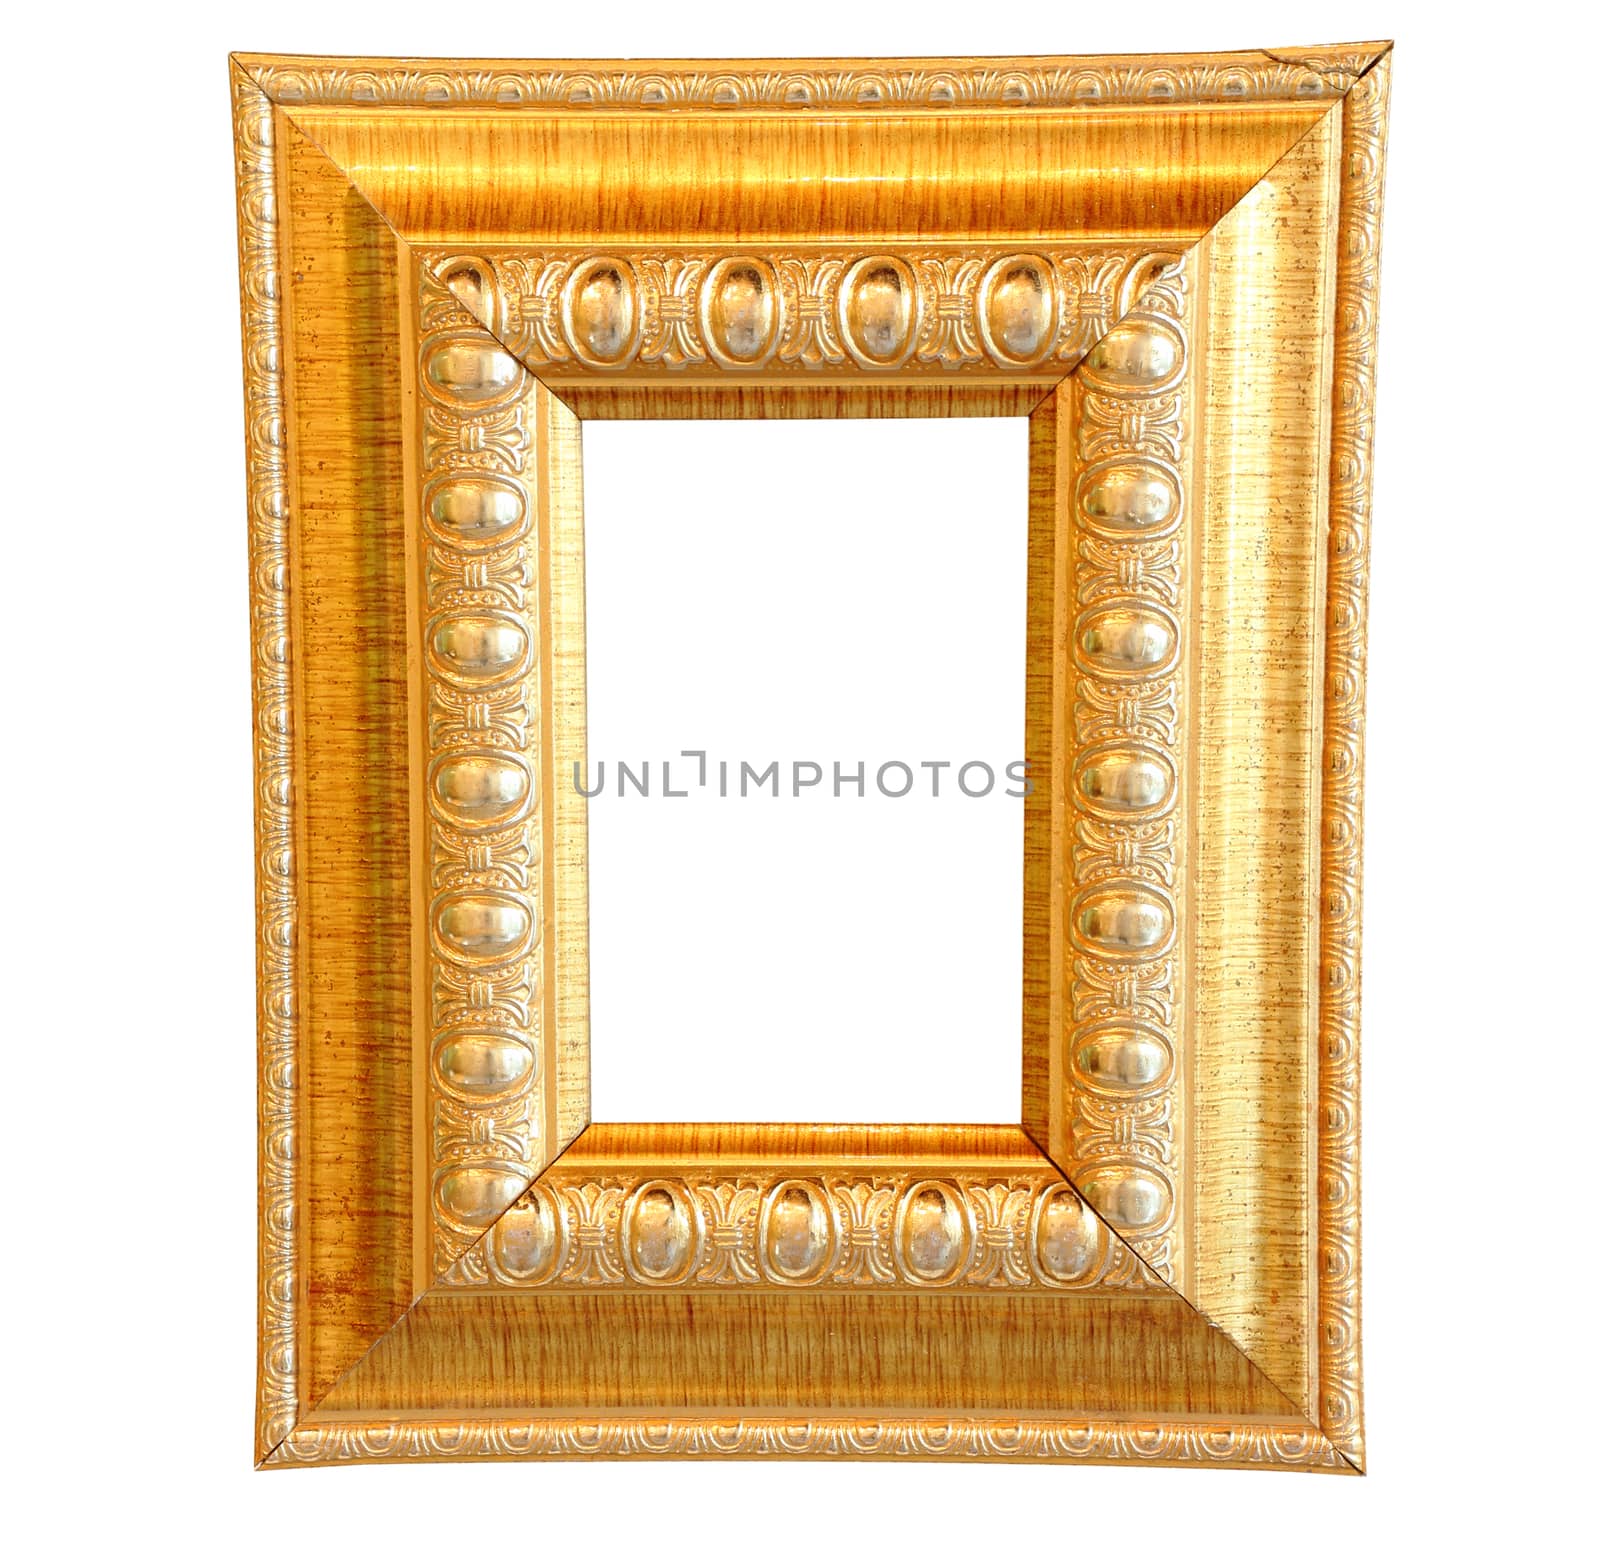 Vintage gold wooden photo frame, clipping path